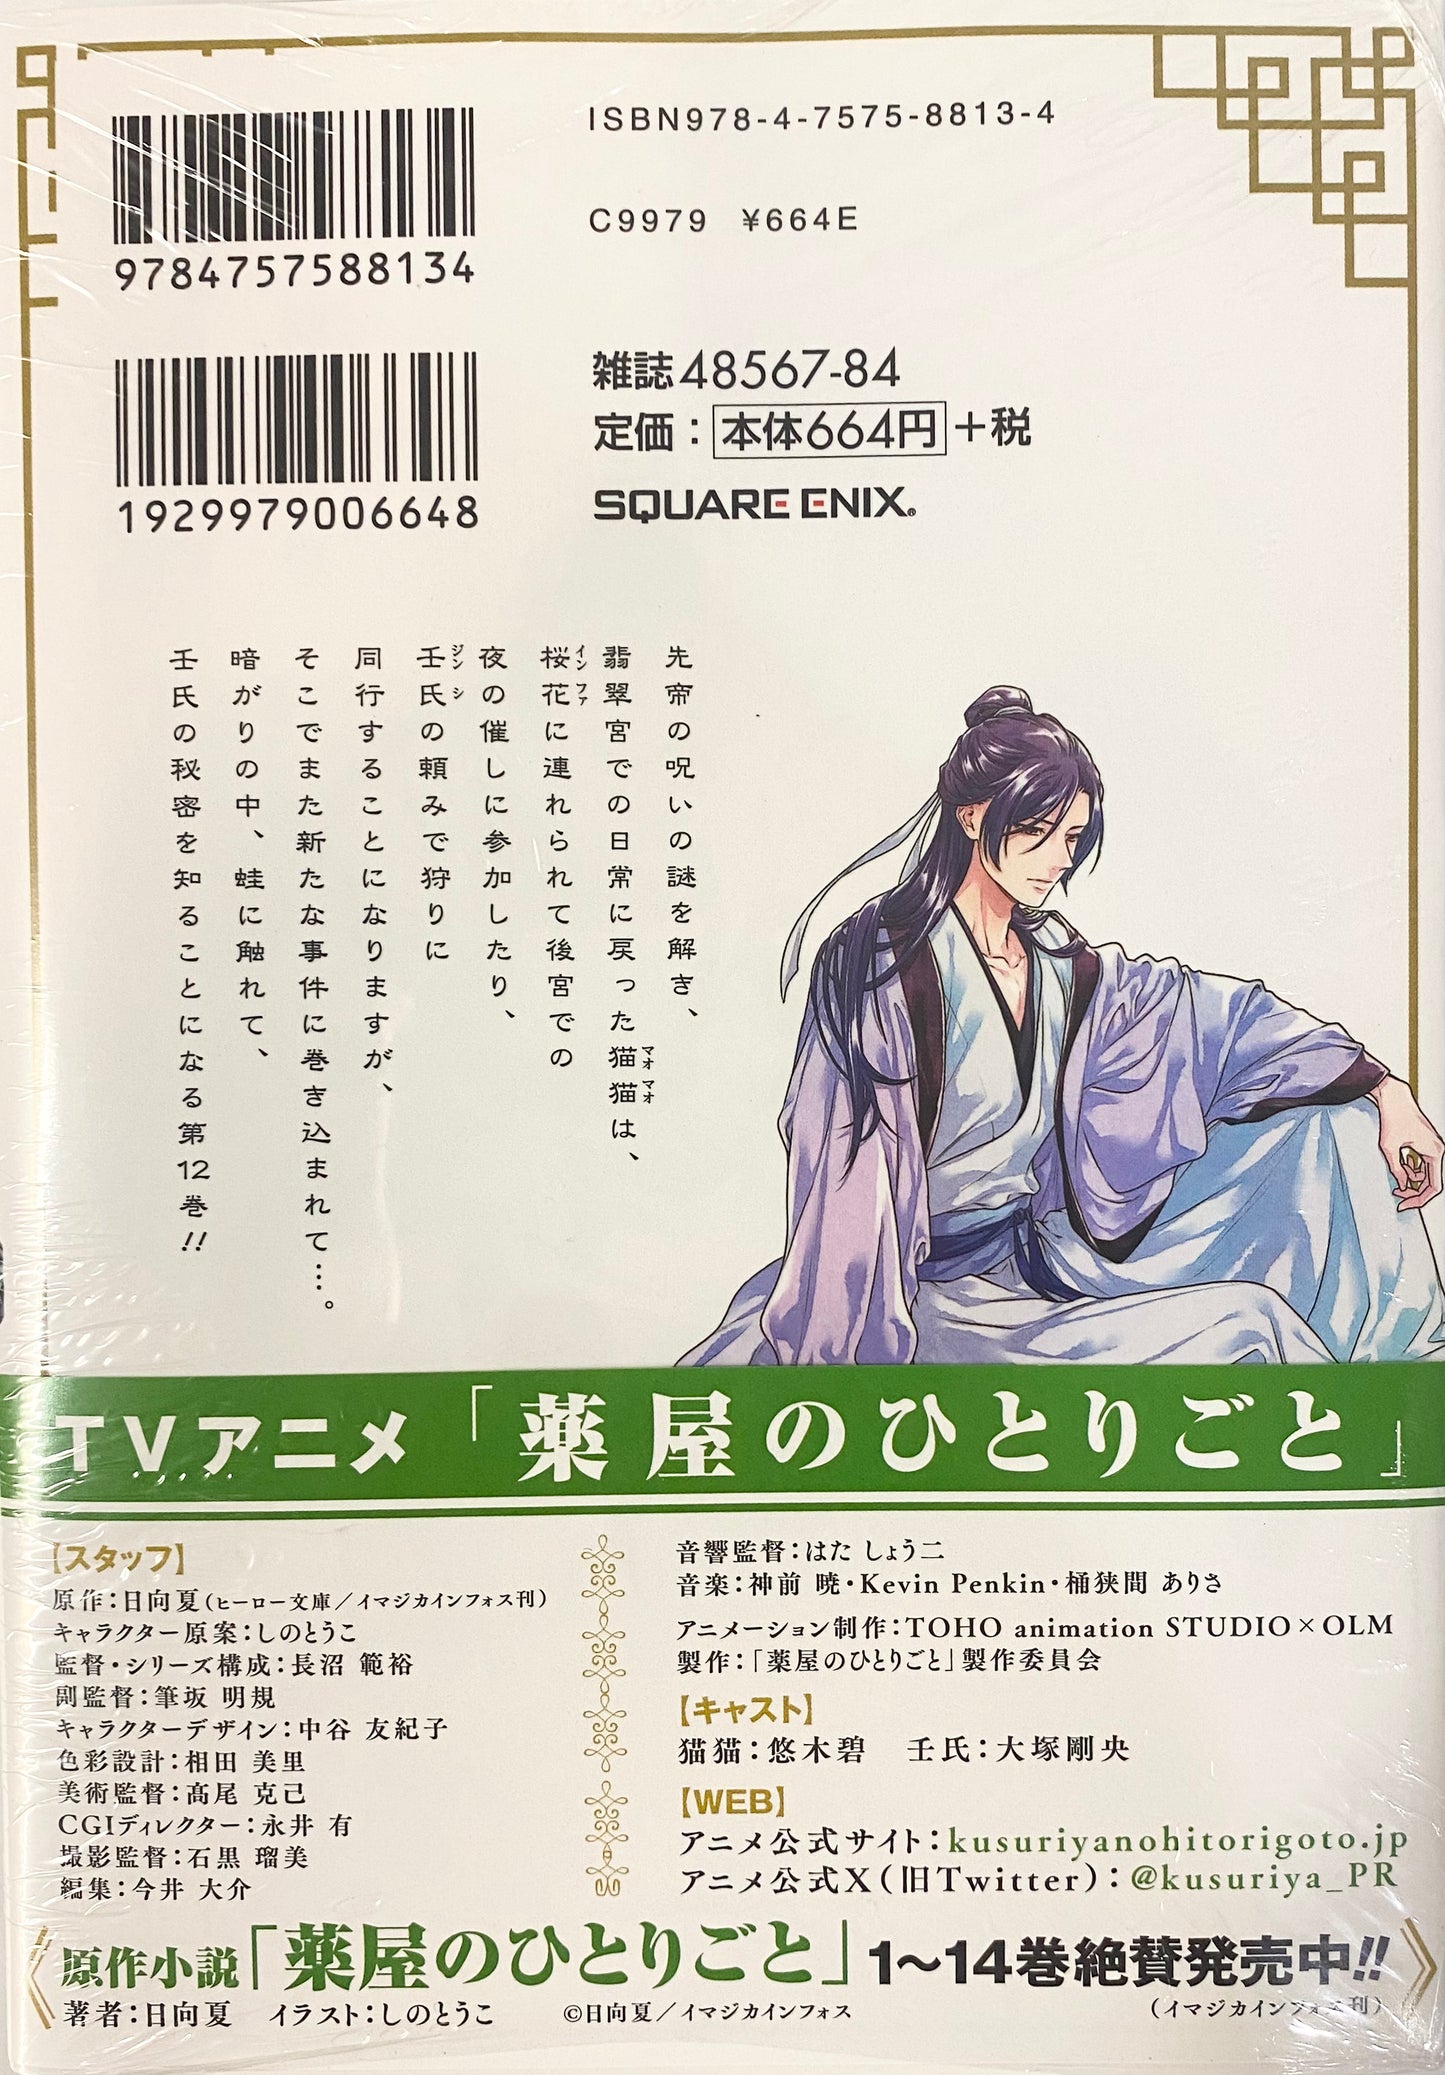 The Apothecary Diaries Vol.12-Official Japanese Edition